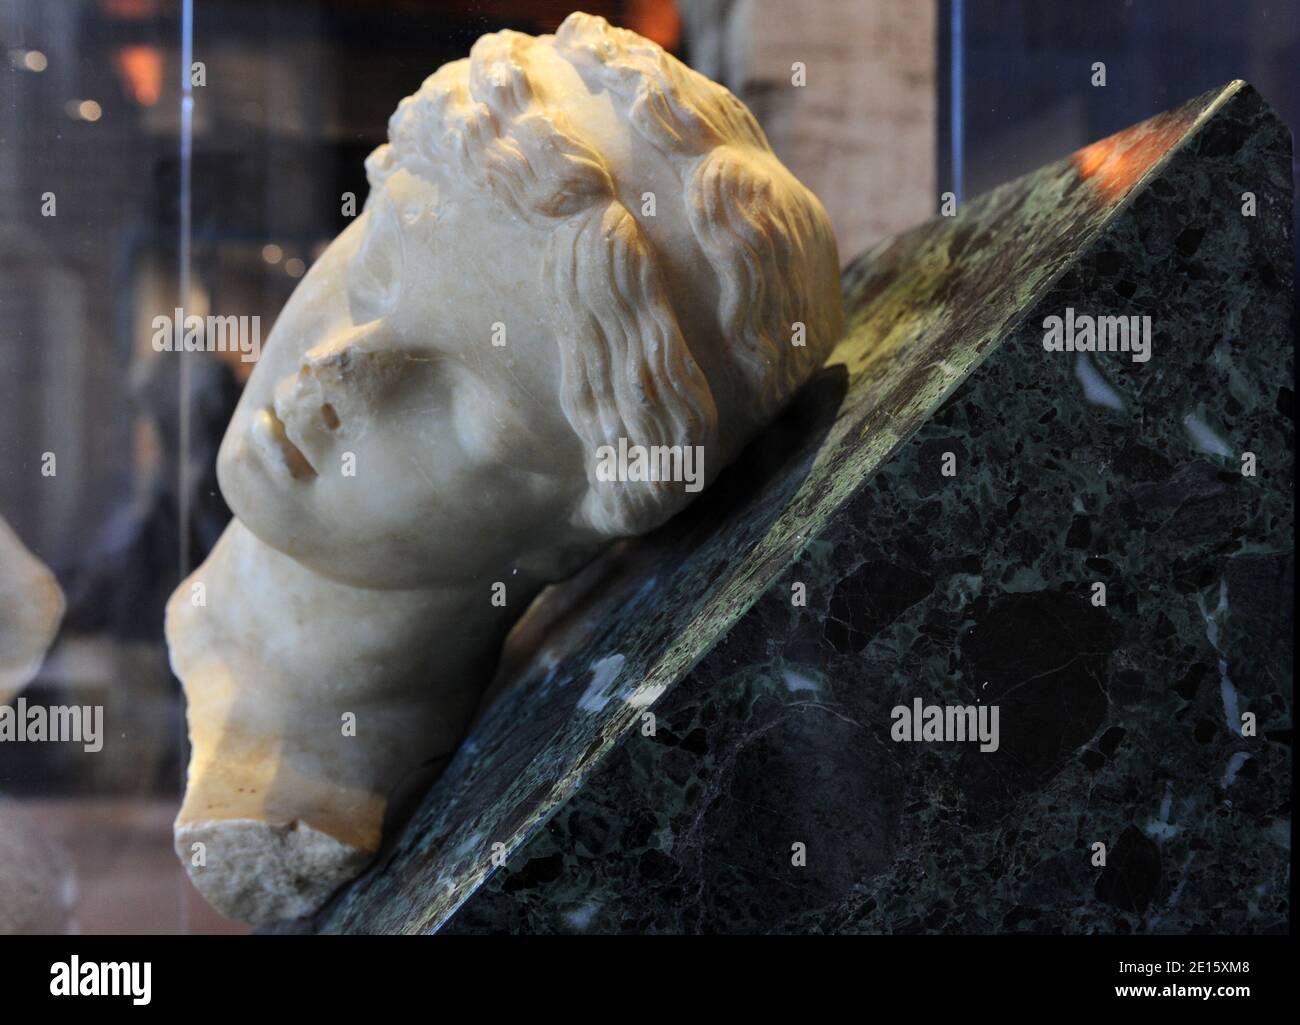 Head of a sleeping girl, from Subiaco, so-called Villa of Nerone, is pictured at the exhibit 'Nerone', examining the life and dark legends of Emperor Nero (37-68 AD), which opens in Rome ,Italy on April 12, 2011 across five different landmarks of the ancient imperial capital. Nero has been infamous throughout history for tyranny, extravagance, cold-blooded murder, and cruel persecution of Christians. Ancient Roman historians accused him of killing his mother, stepbrother and two wives, and of burning Christians at night in his garden for firelight. He was known as the emperor 'who fiddled whil Stock Photo